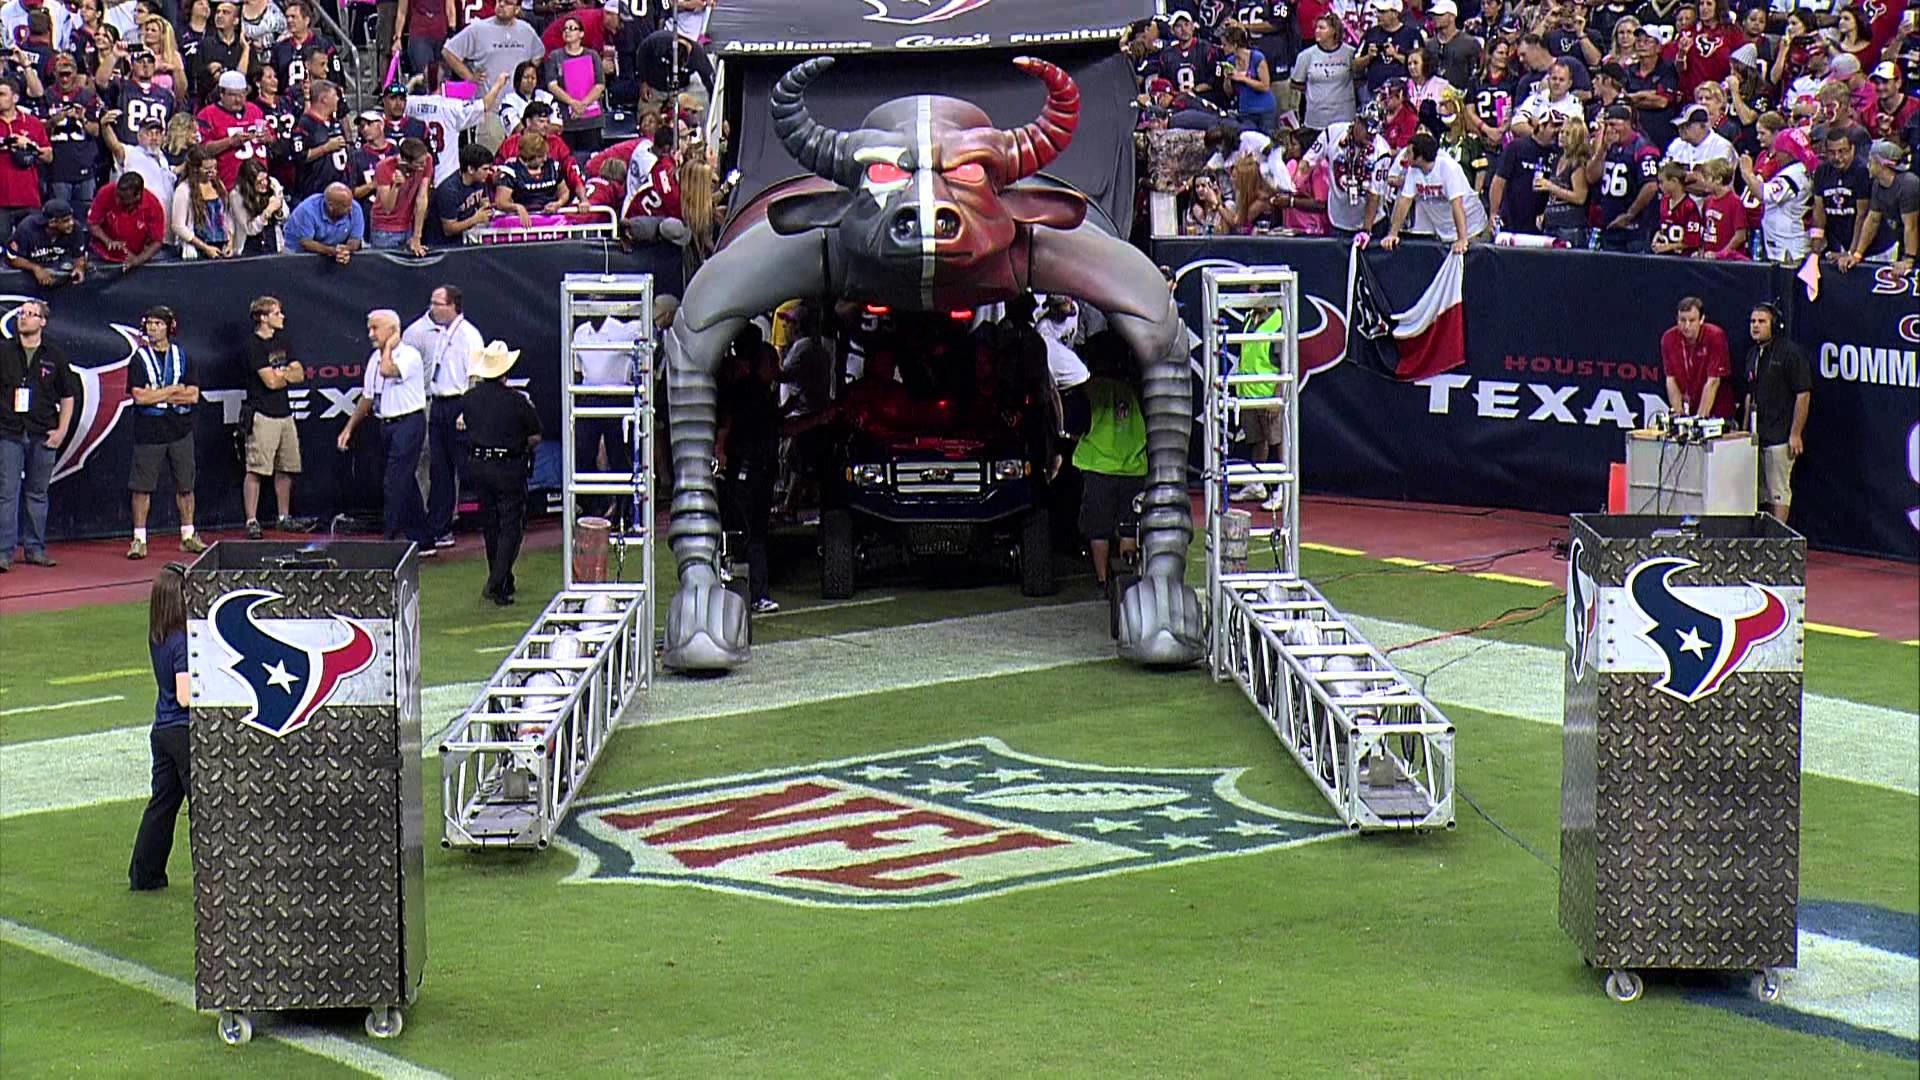 1920x1080 TEXANS BULLS ON PARADE COMING OUT OF THE TUNNEL LIVE SATELLITE .